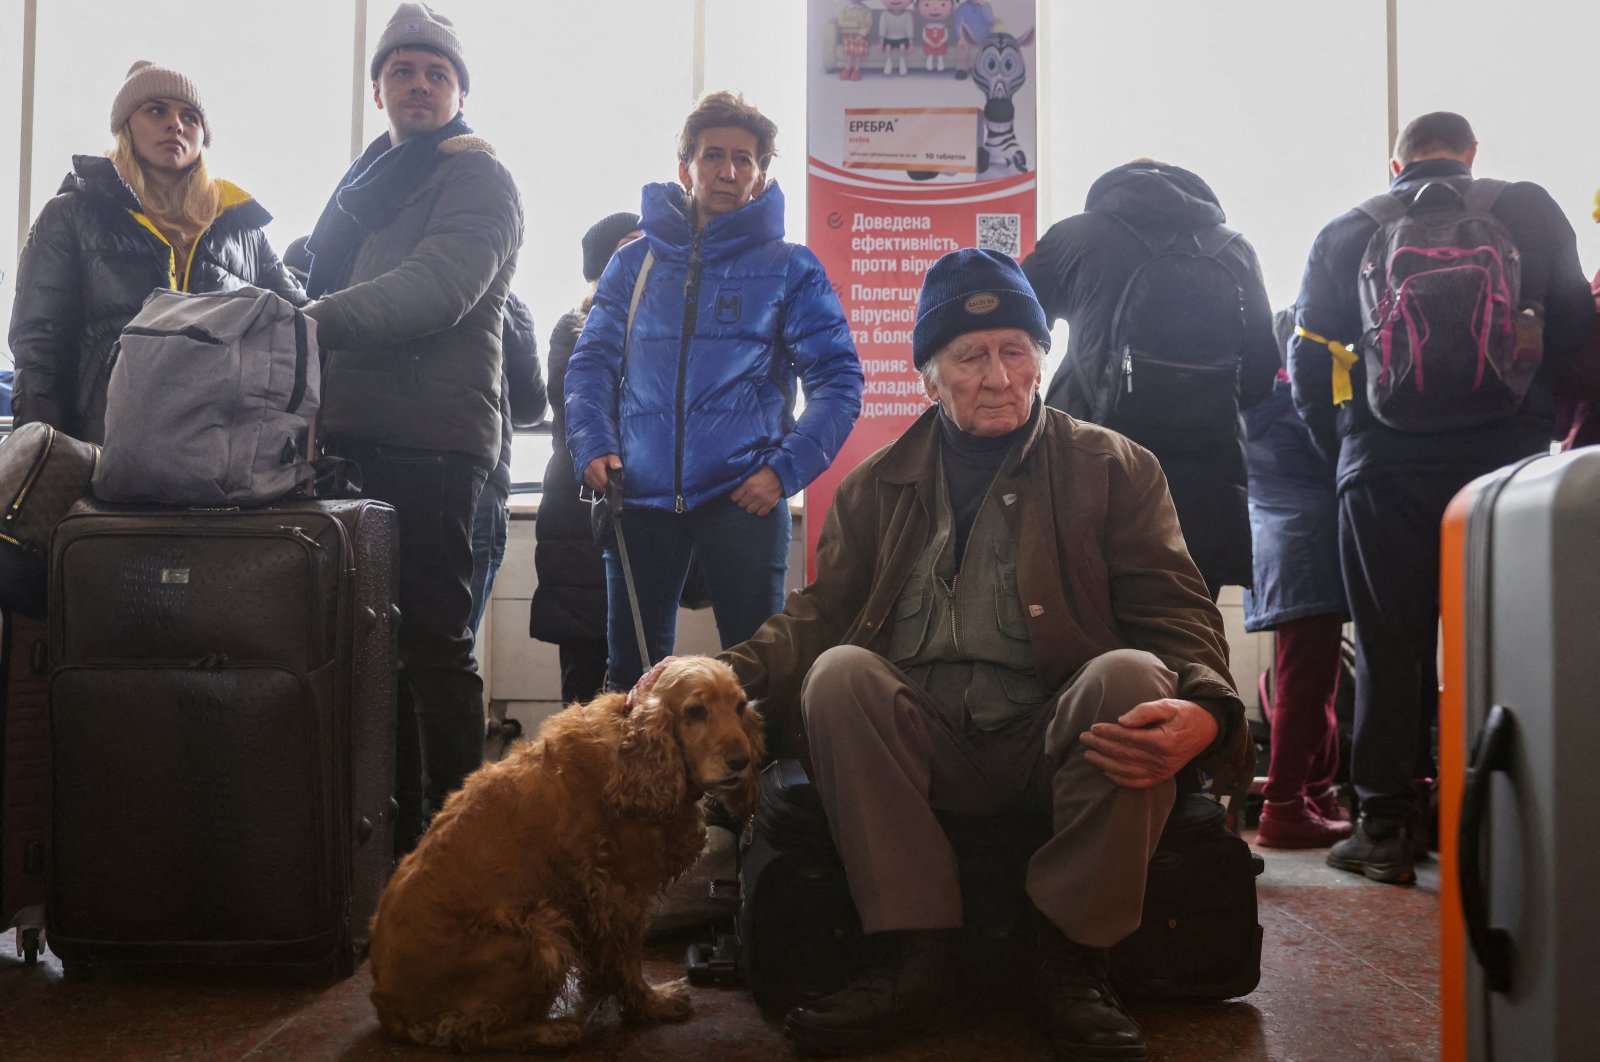 People wait to board an evacuation train from Kyiv to Lviv at Kyiv central train station following Russia&#039;s invasion of Ukraine, in Kyiv, Ukraine March 1, 2022. (REUTERS)